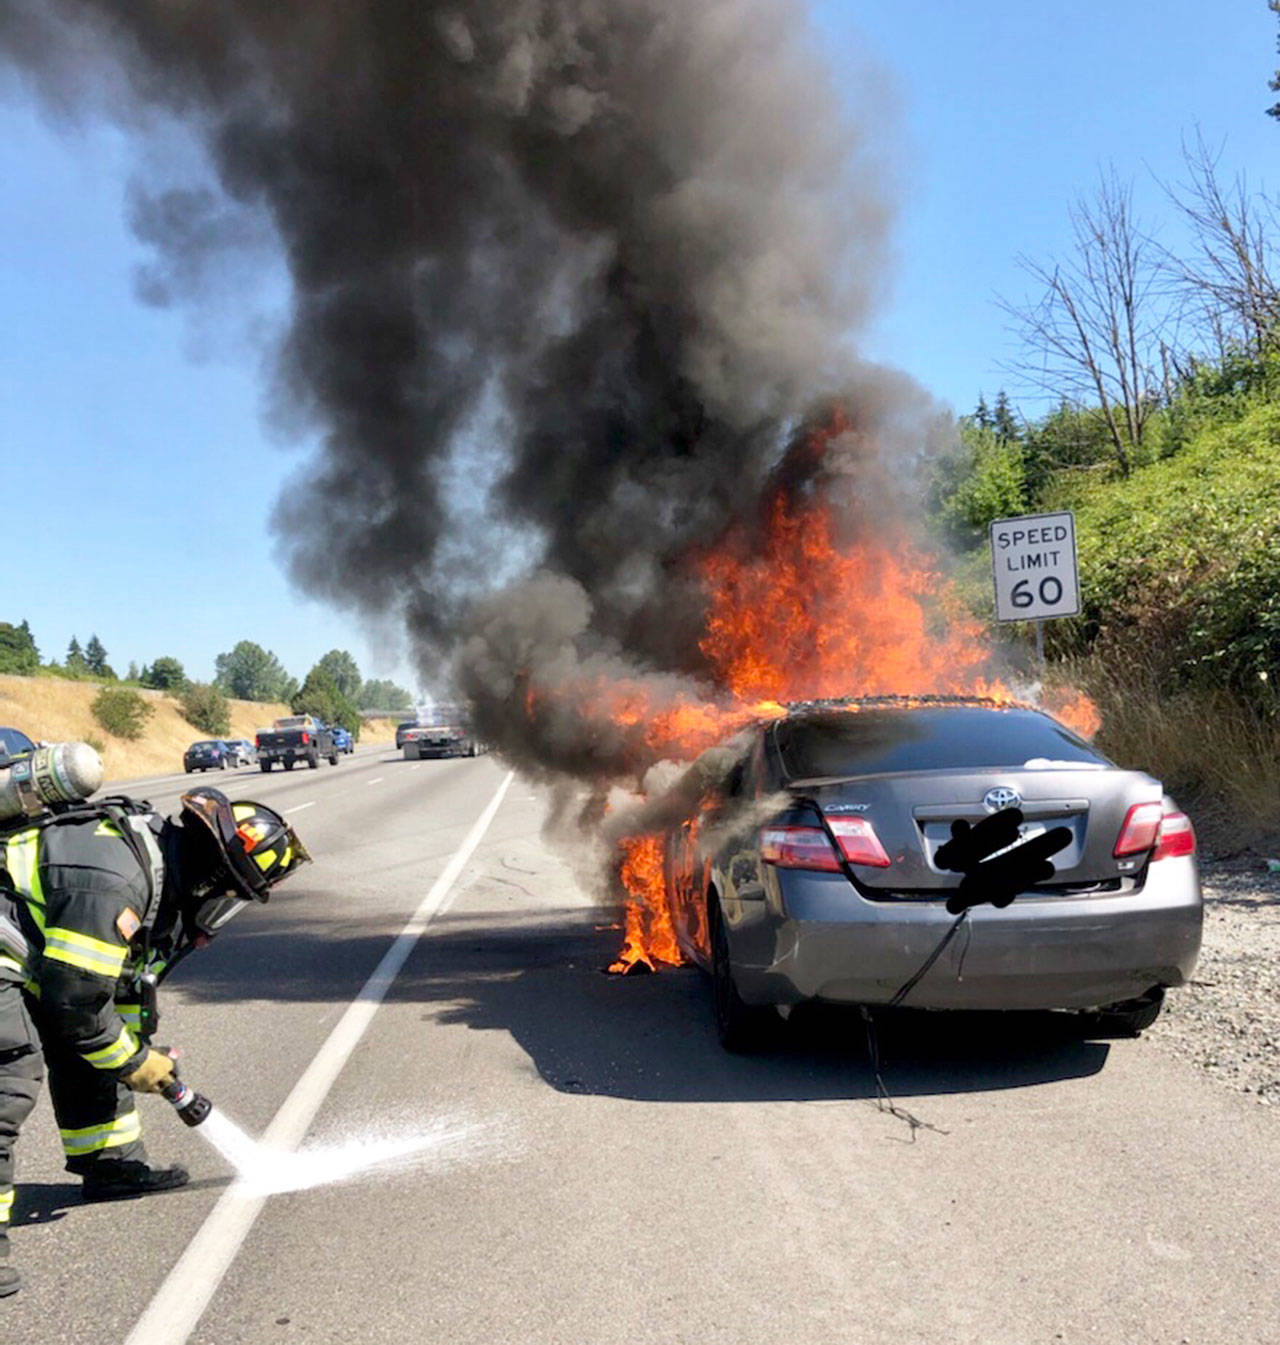 Firefighters attack a car fire Monday morning, July 27, along Interstate 5 northbound near the South 188th Street exit in SeaTac. COURTESY PHOTO, Tukwila Fire